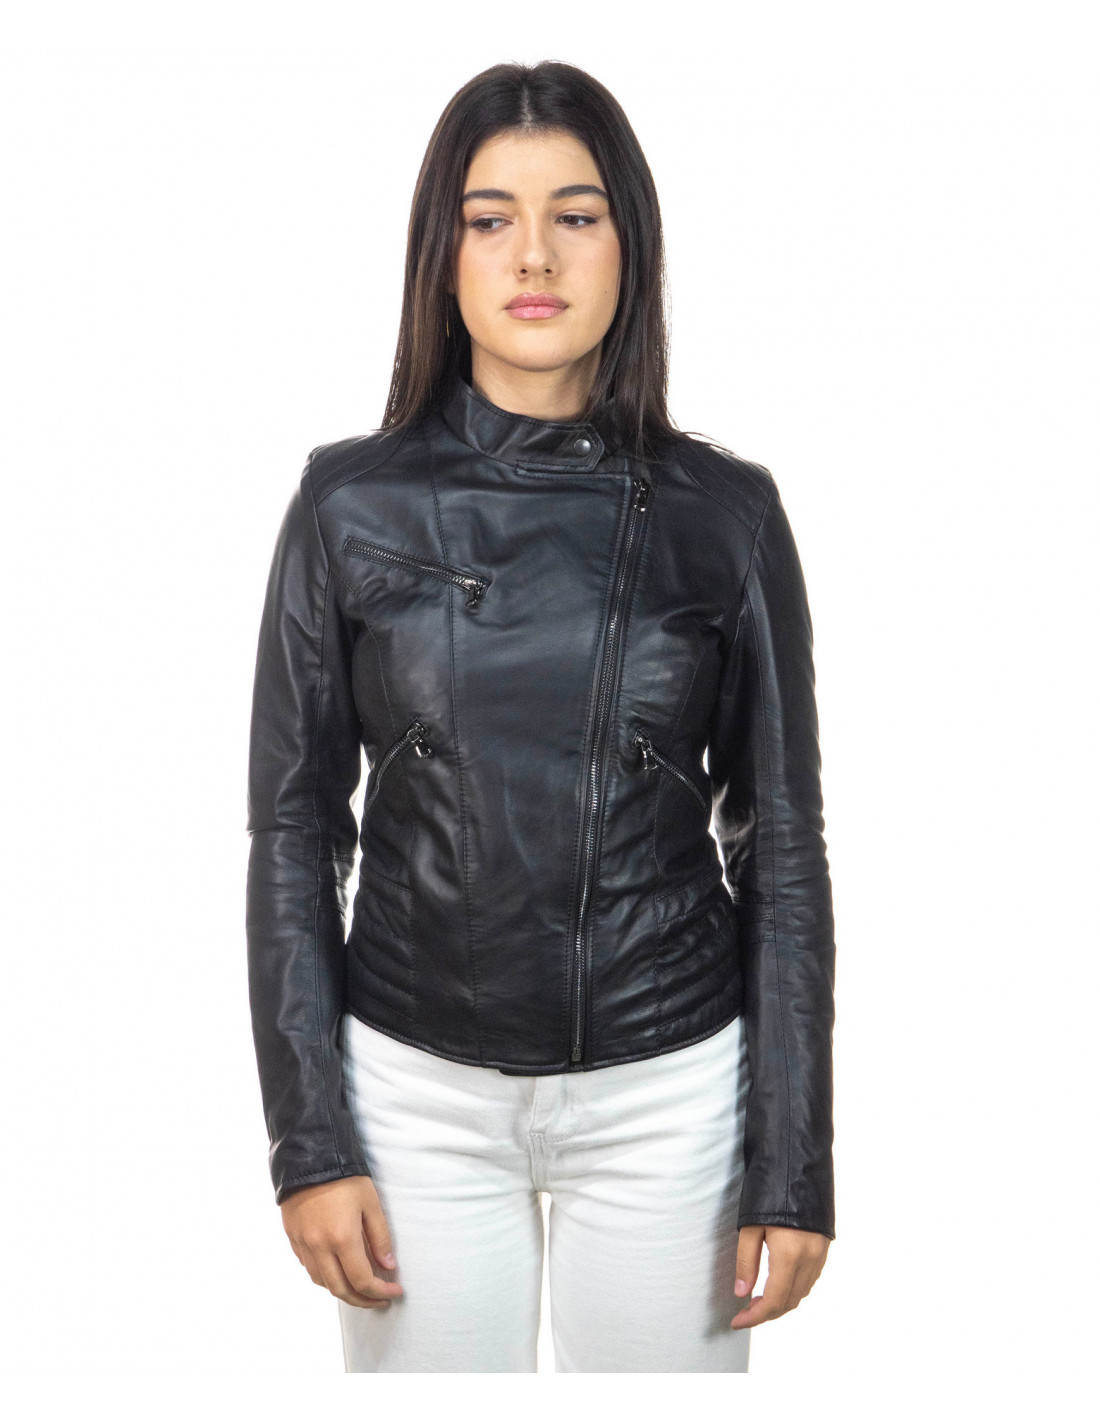 Woman leather jacket mod. Raff in genuine Black leather 100% made in Italy